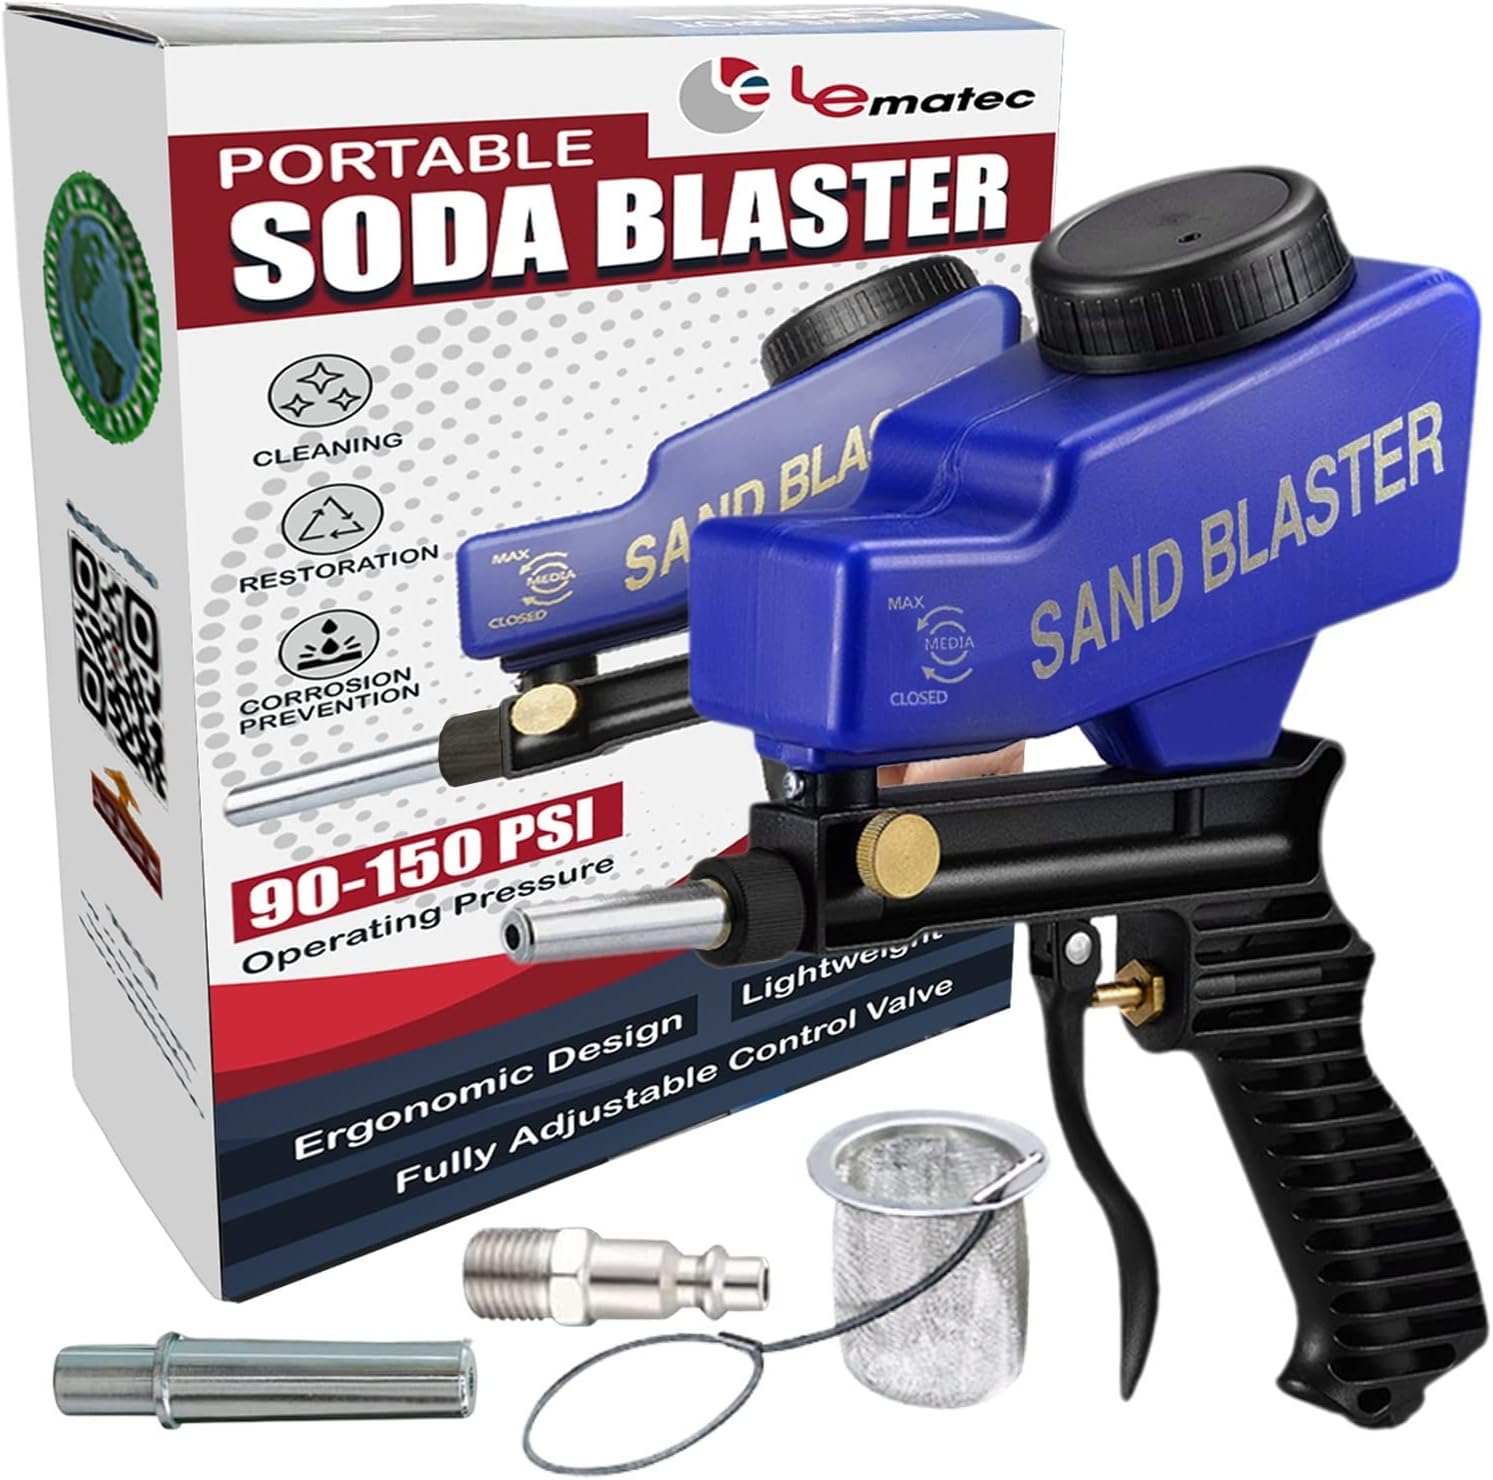 Ubiquitous Le Lematec Soda Blaster For Sandblasting, DIY Projects, Removes Paint, Rust, Stains.